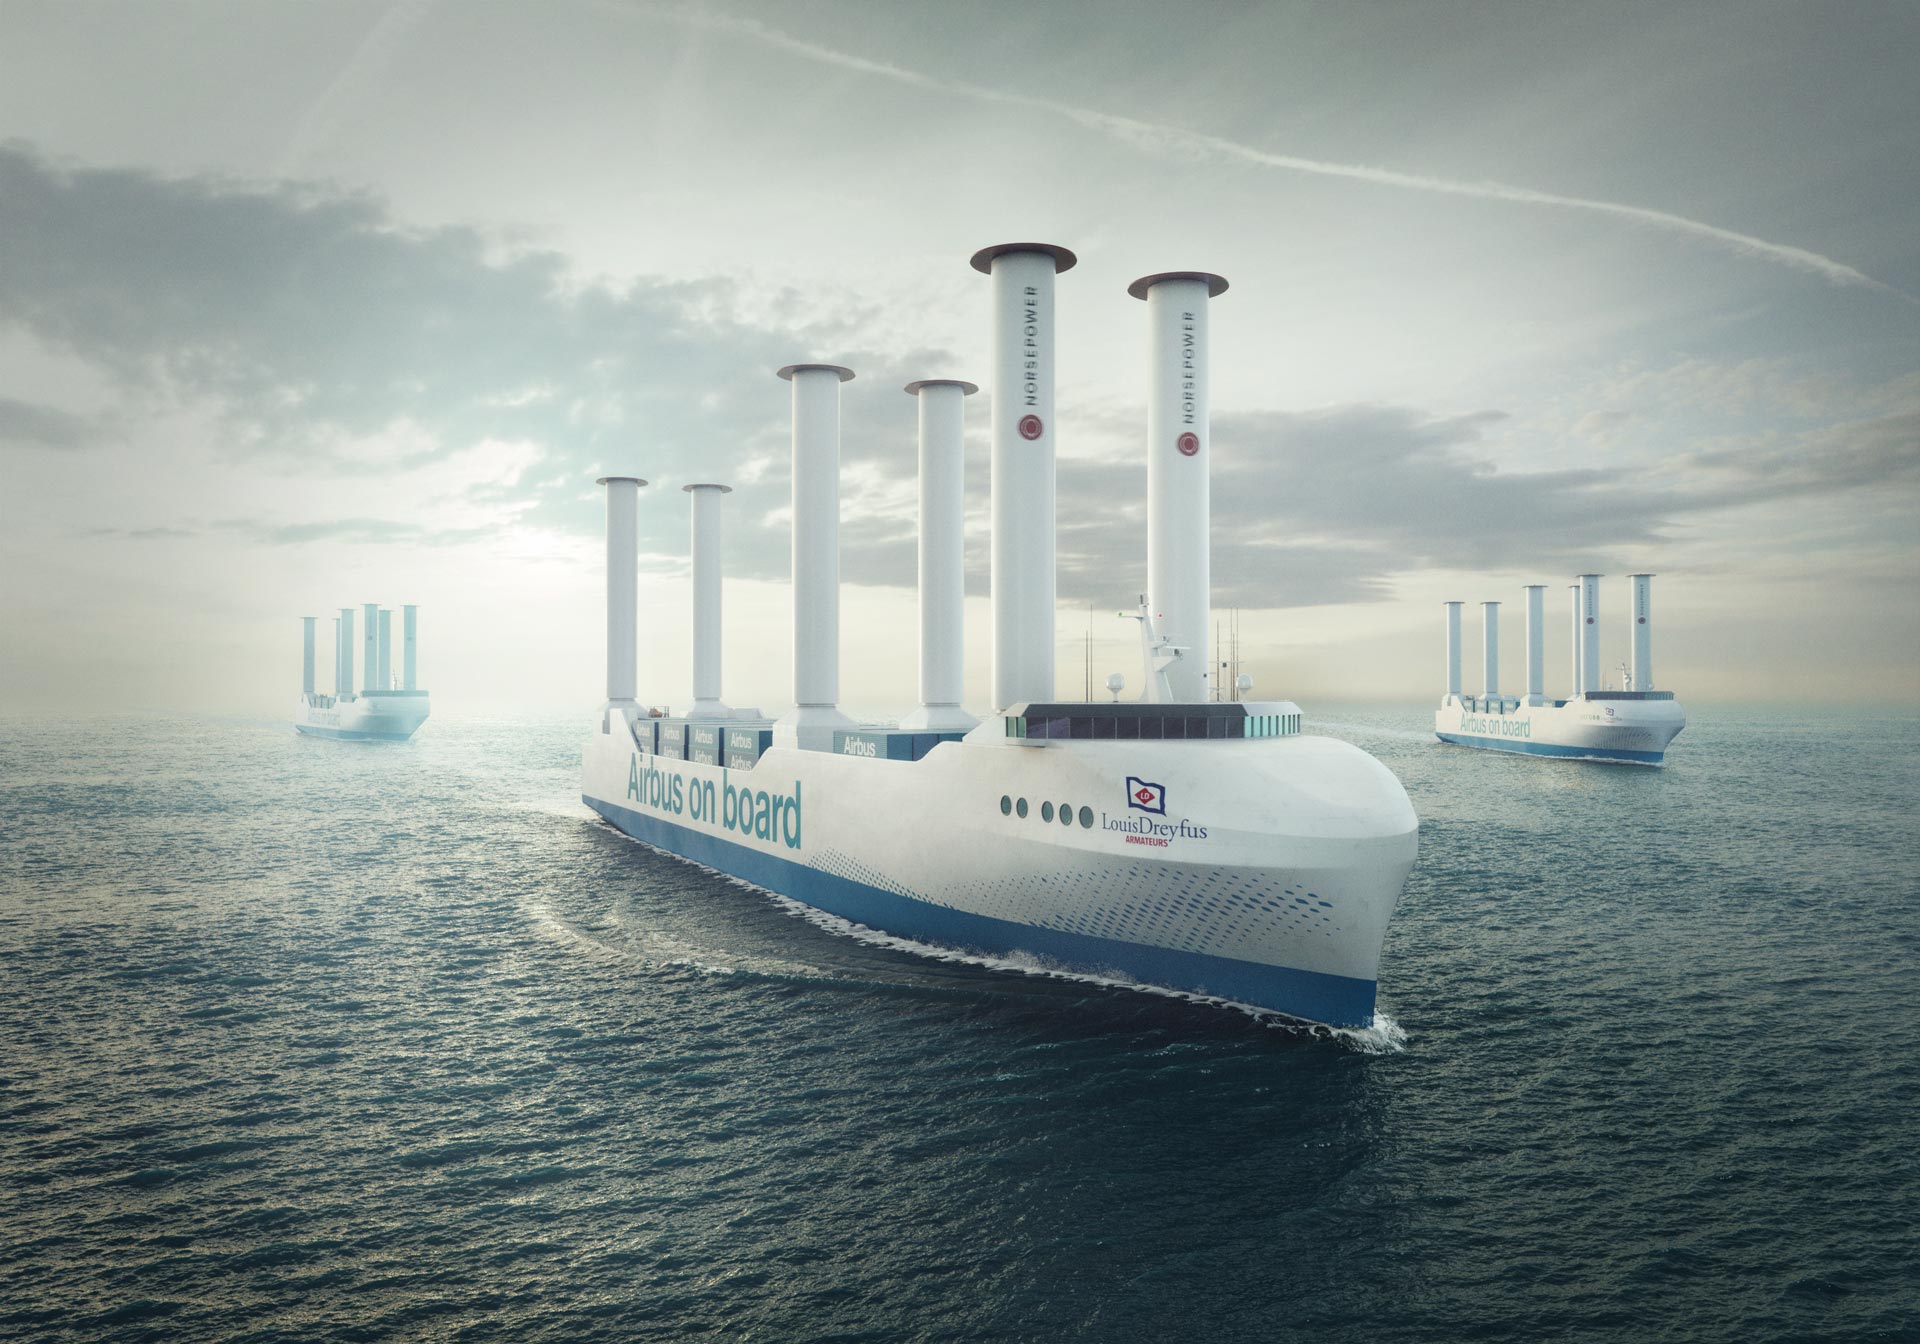 LDA and Norsepower join forces in shipping large airbus aircraft components: future fleet of low-emission roros to use Norsepower rotor sails™